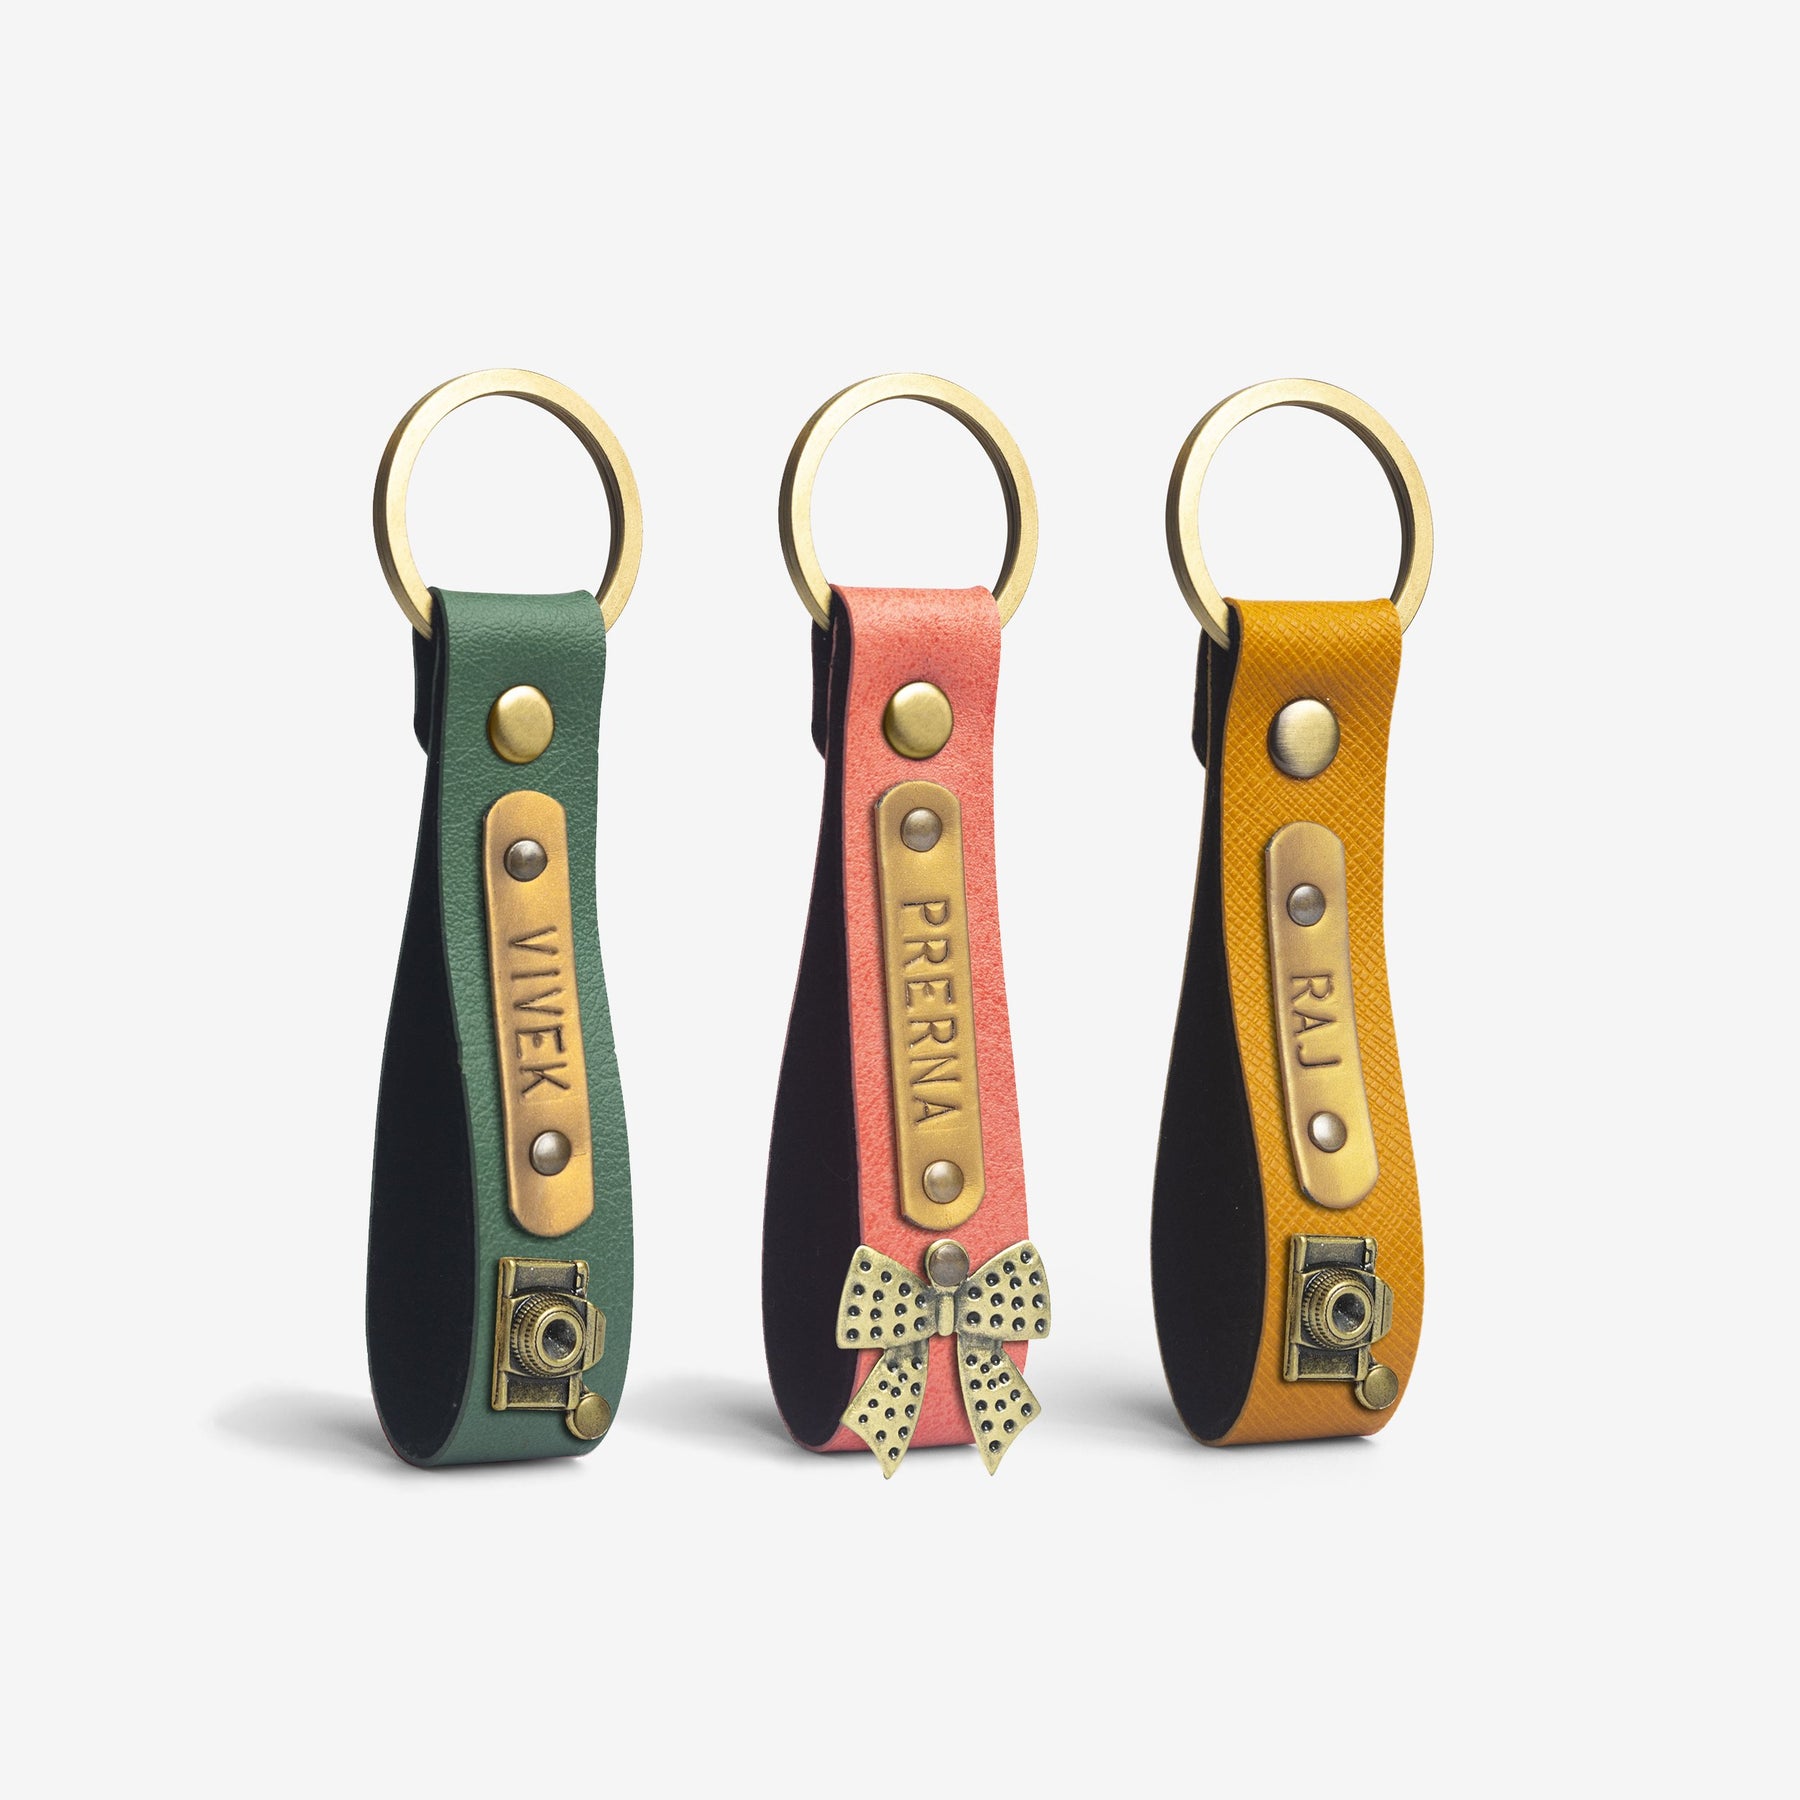 The Messy Corner Keychain Personalized Leather Keychain - Set of Three